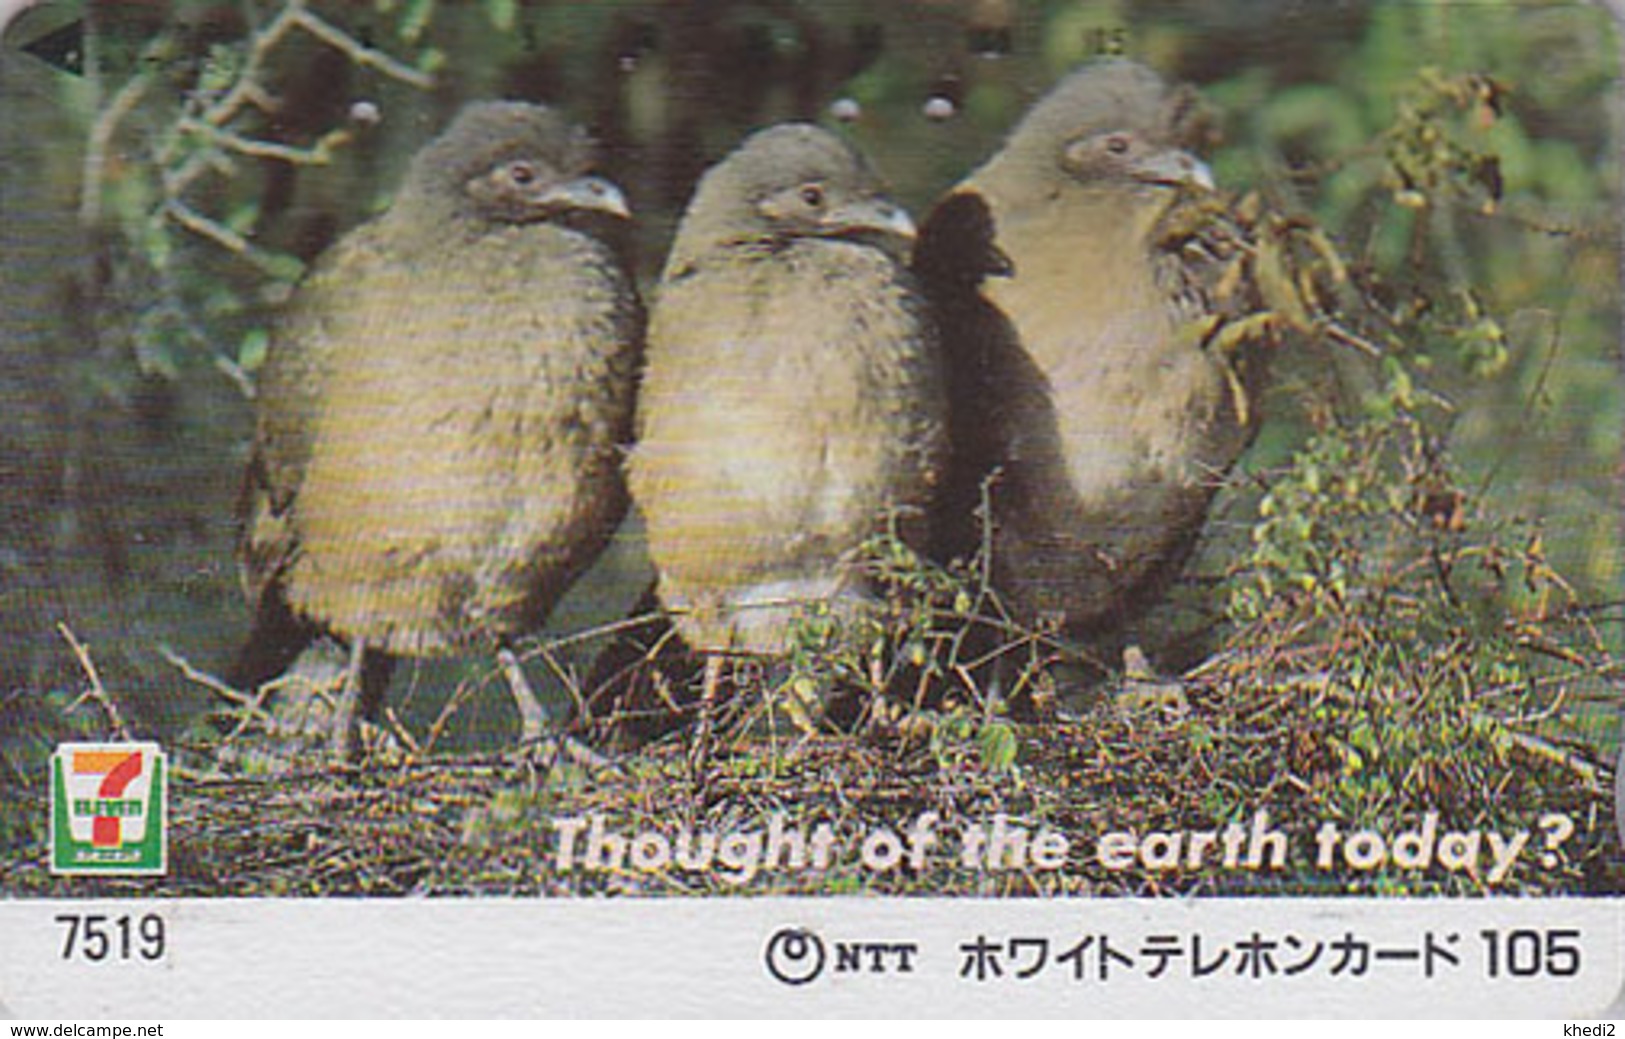 Télécarte JAPON / SERIE 7/11 - 7519 TBE - THOUGHT OF THE EARTH TODAY - ANIMAL - OISEAU - BIRD JAPAN Phonecard - Vogel BE - Pájaros Cantores (Passeri)